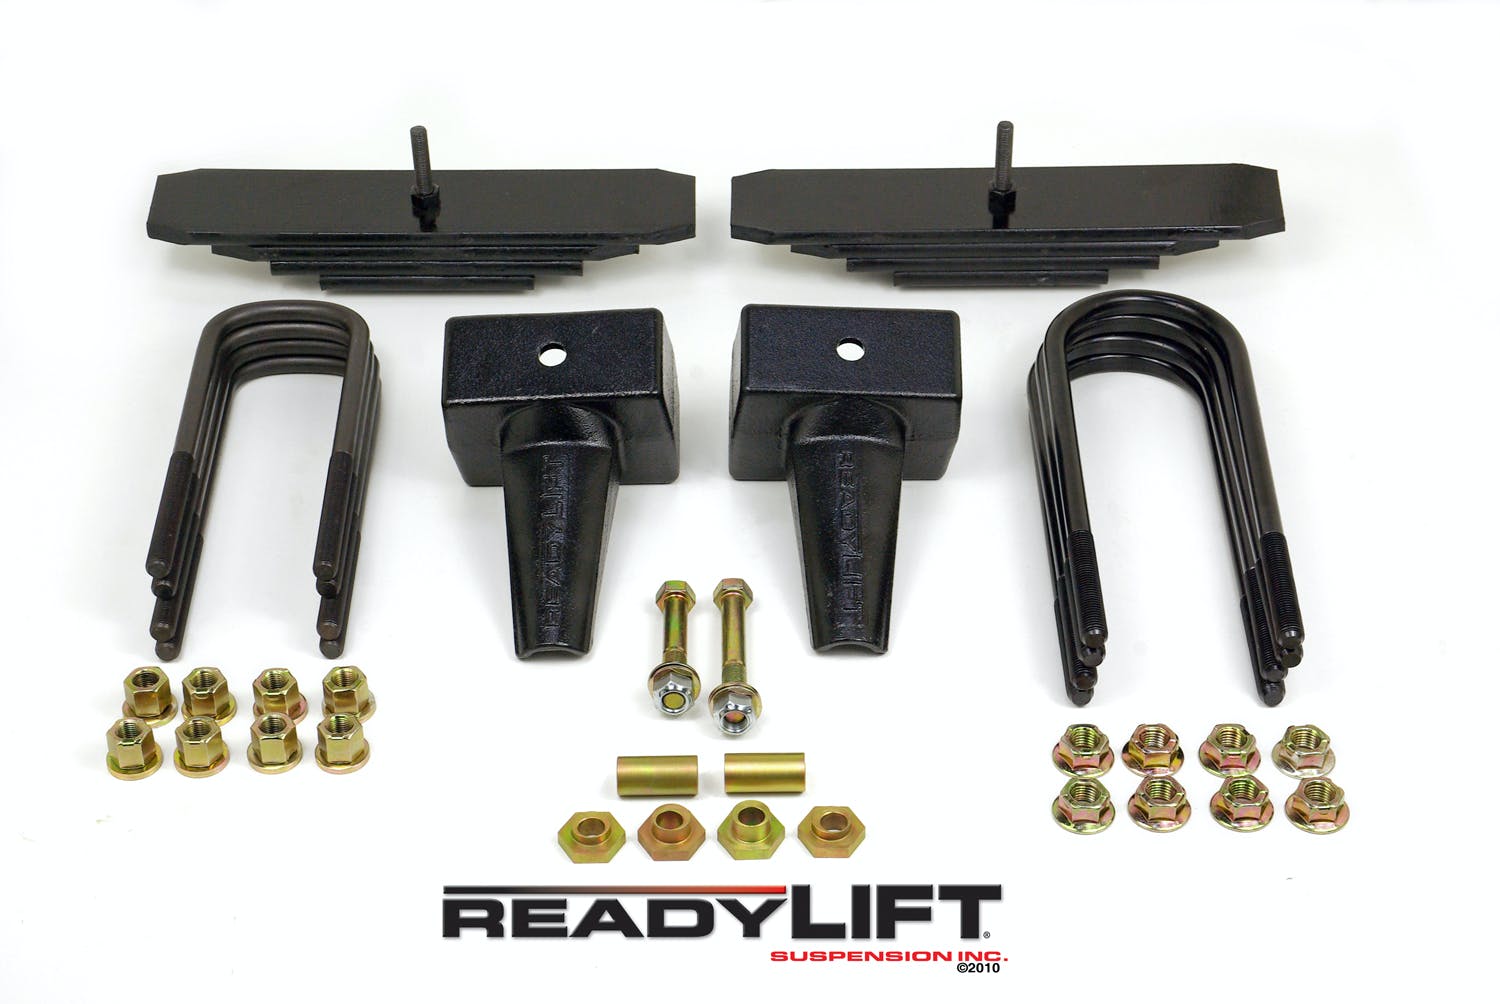 ReadyLIFT 69-2085 2" Lift Kit 2 Piece Drive Shaft includes Carrier Bearing Spacer